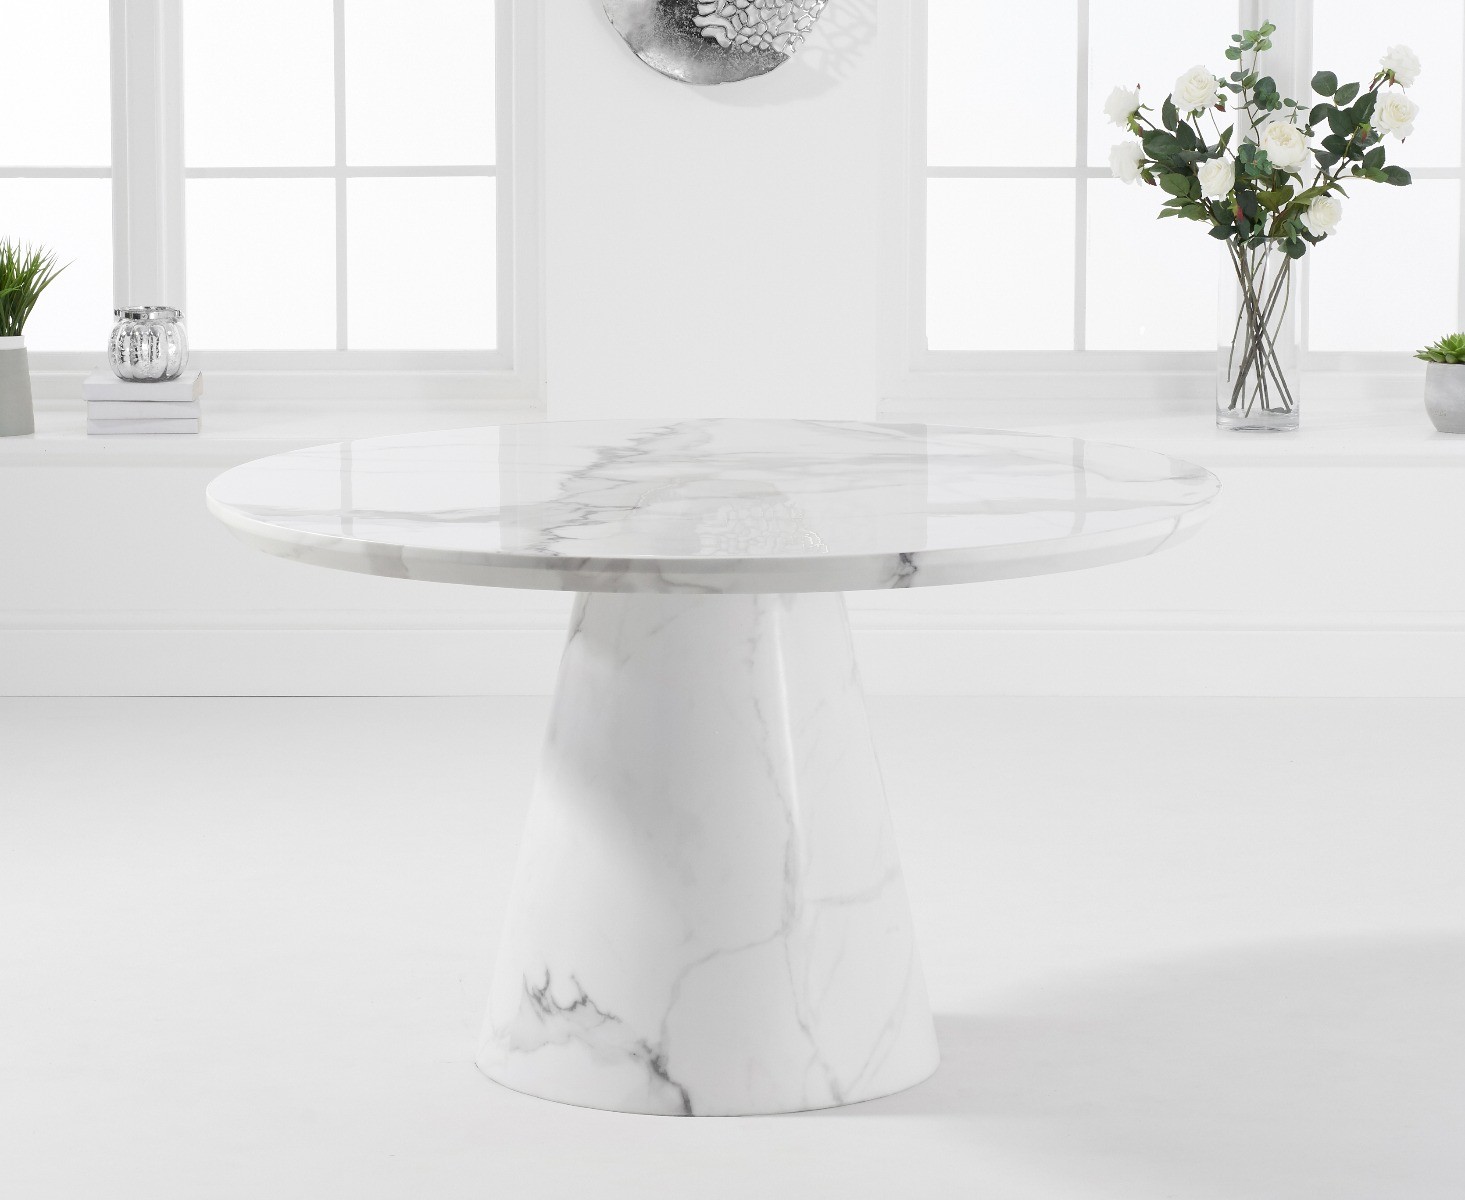 Photo 1 of Ravello 130cm round white marble dining table with 4 white aldo chairs